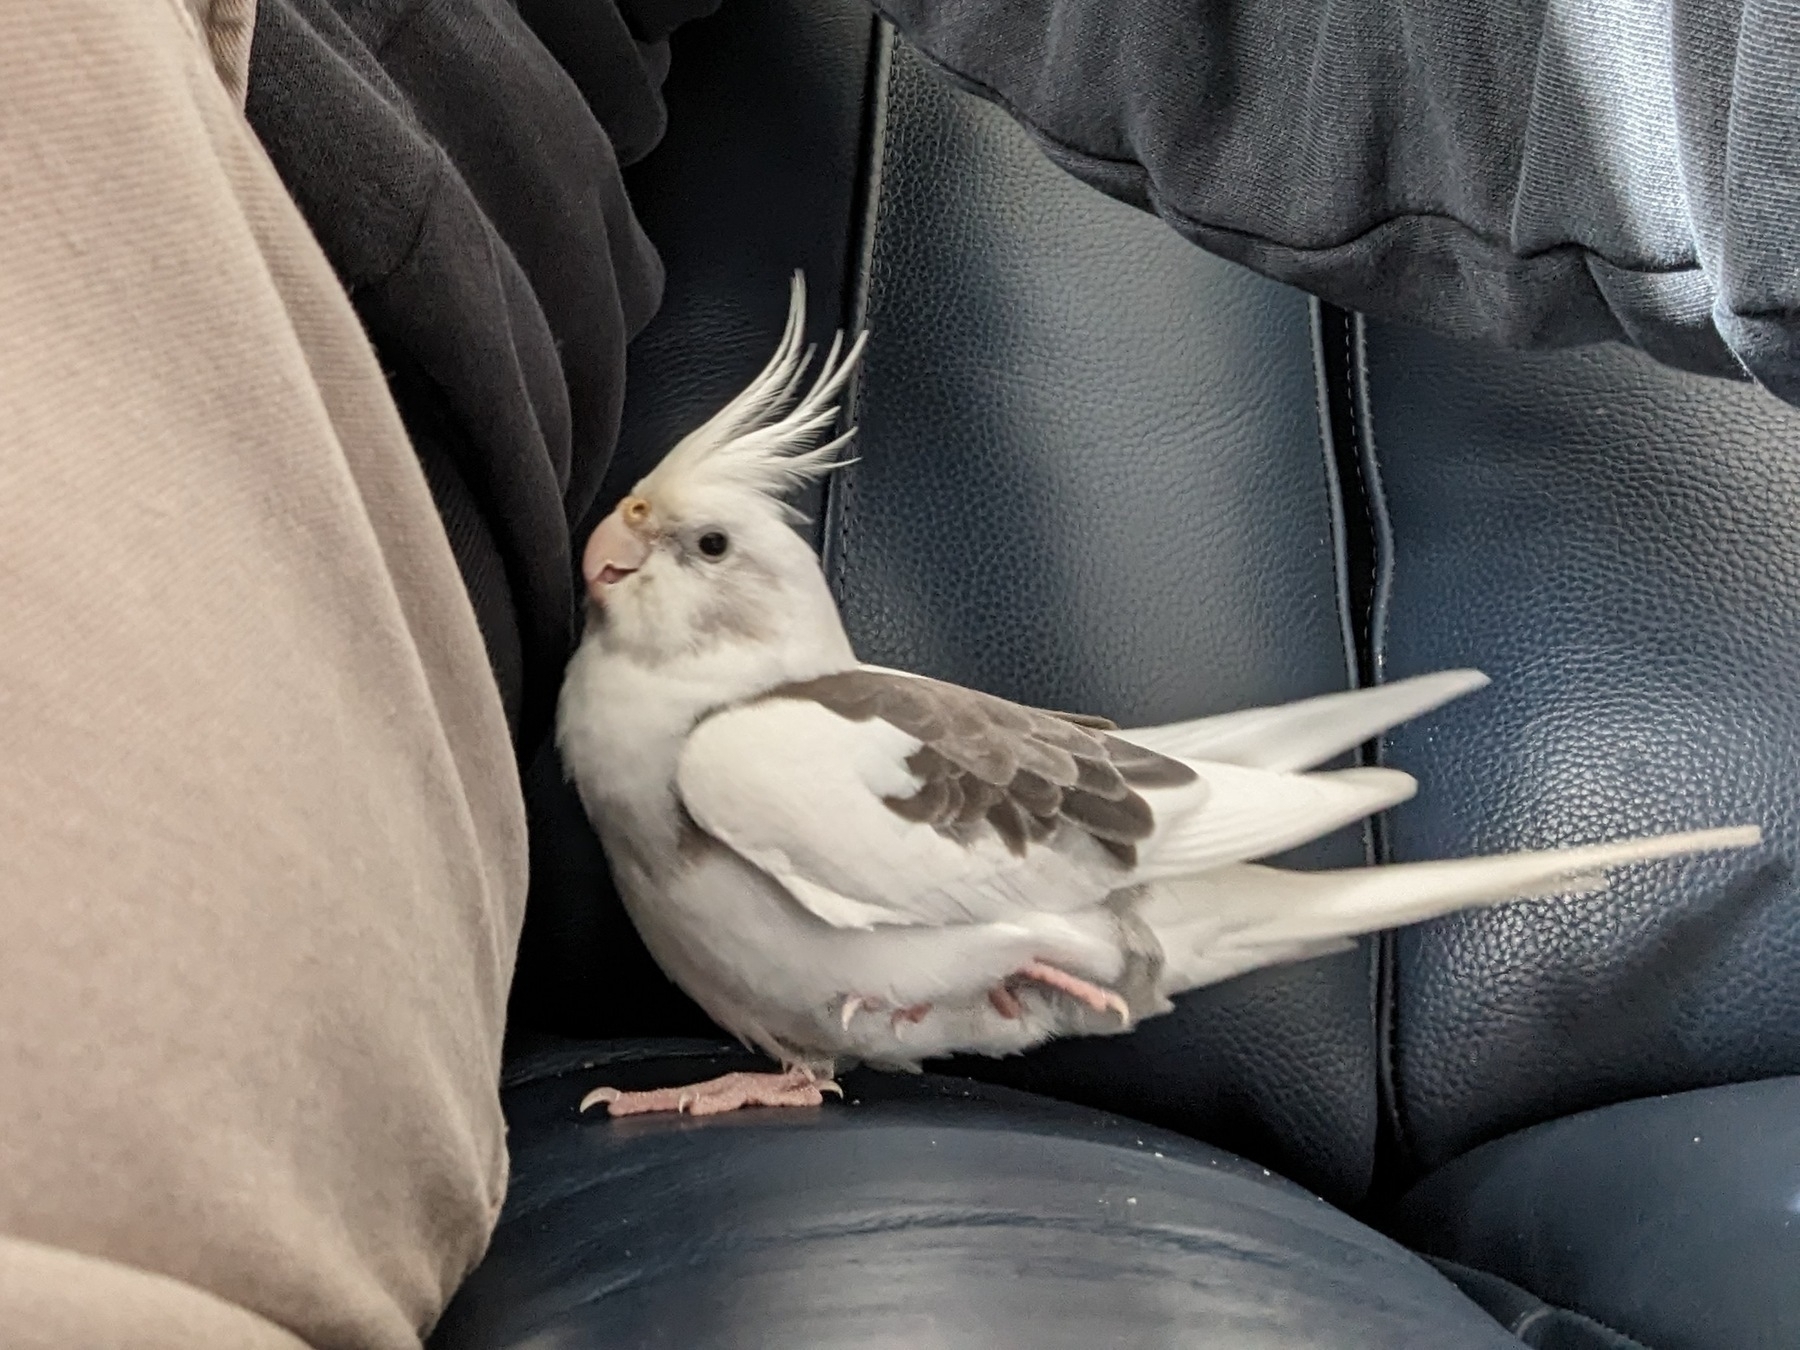 Auto-generated description: A small white and gray cockatiel with a prominent crest is perched on a dark leather couch between two cushions next to one leg of a pair of tanned trousers.